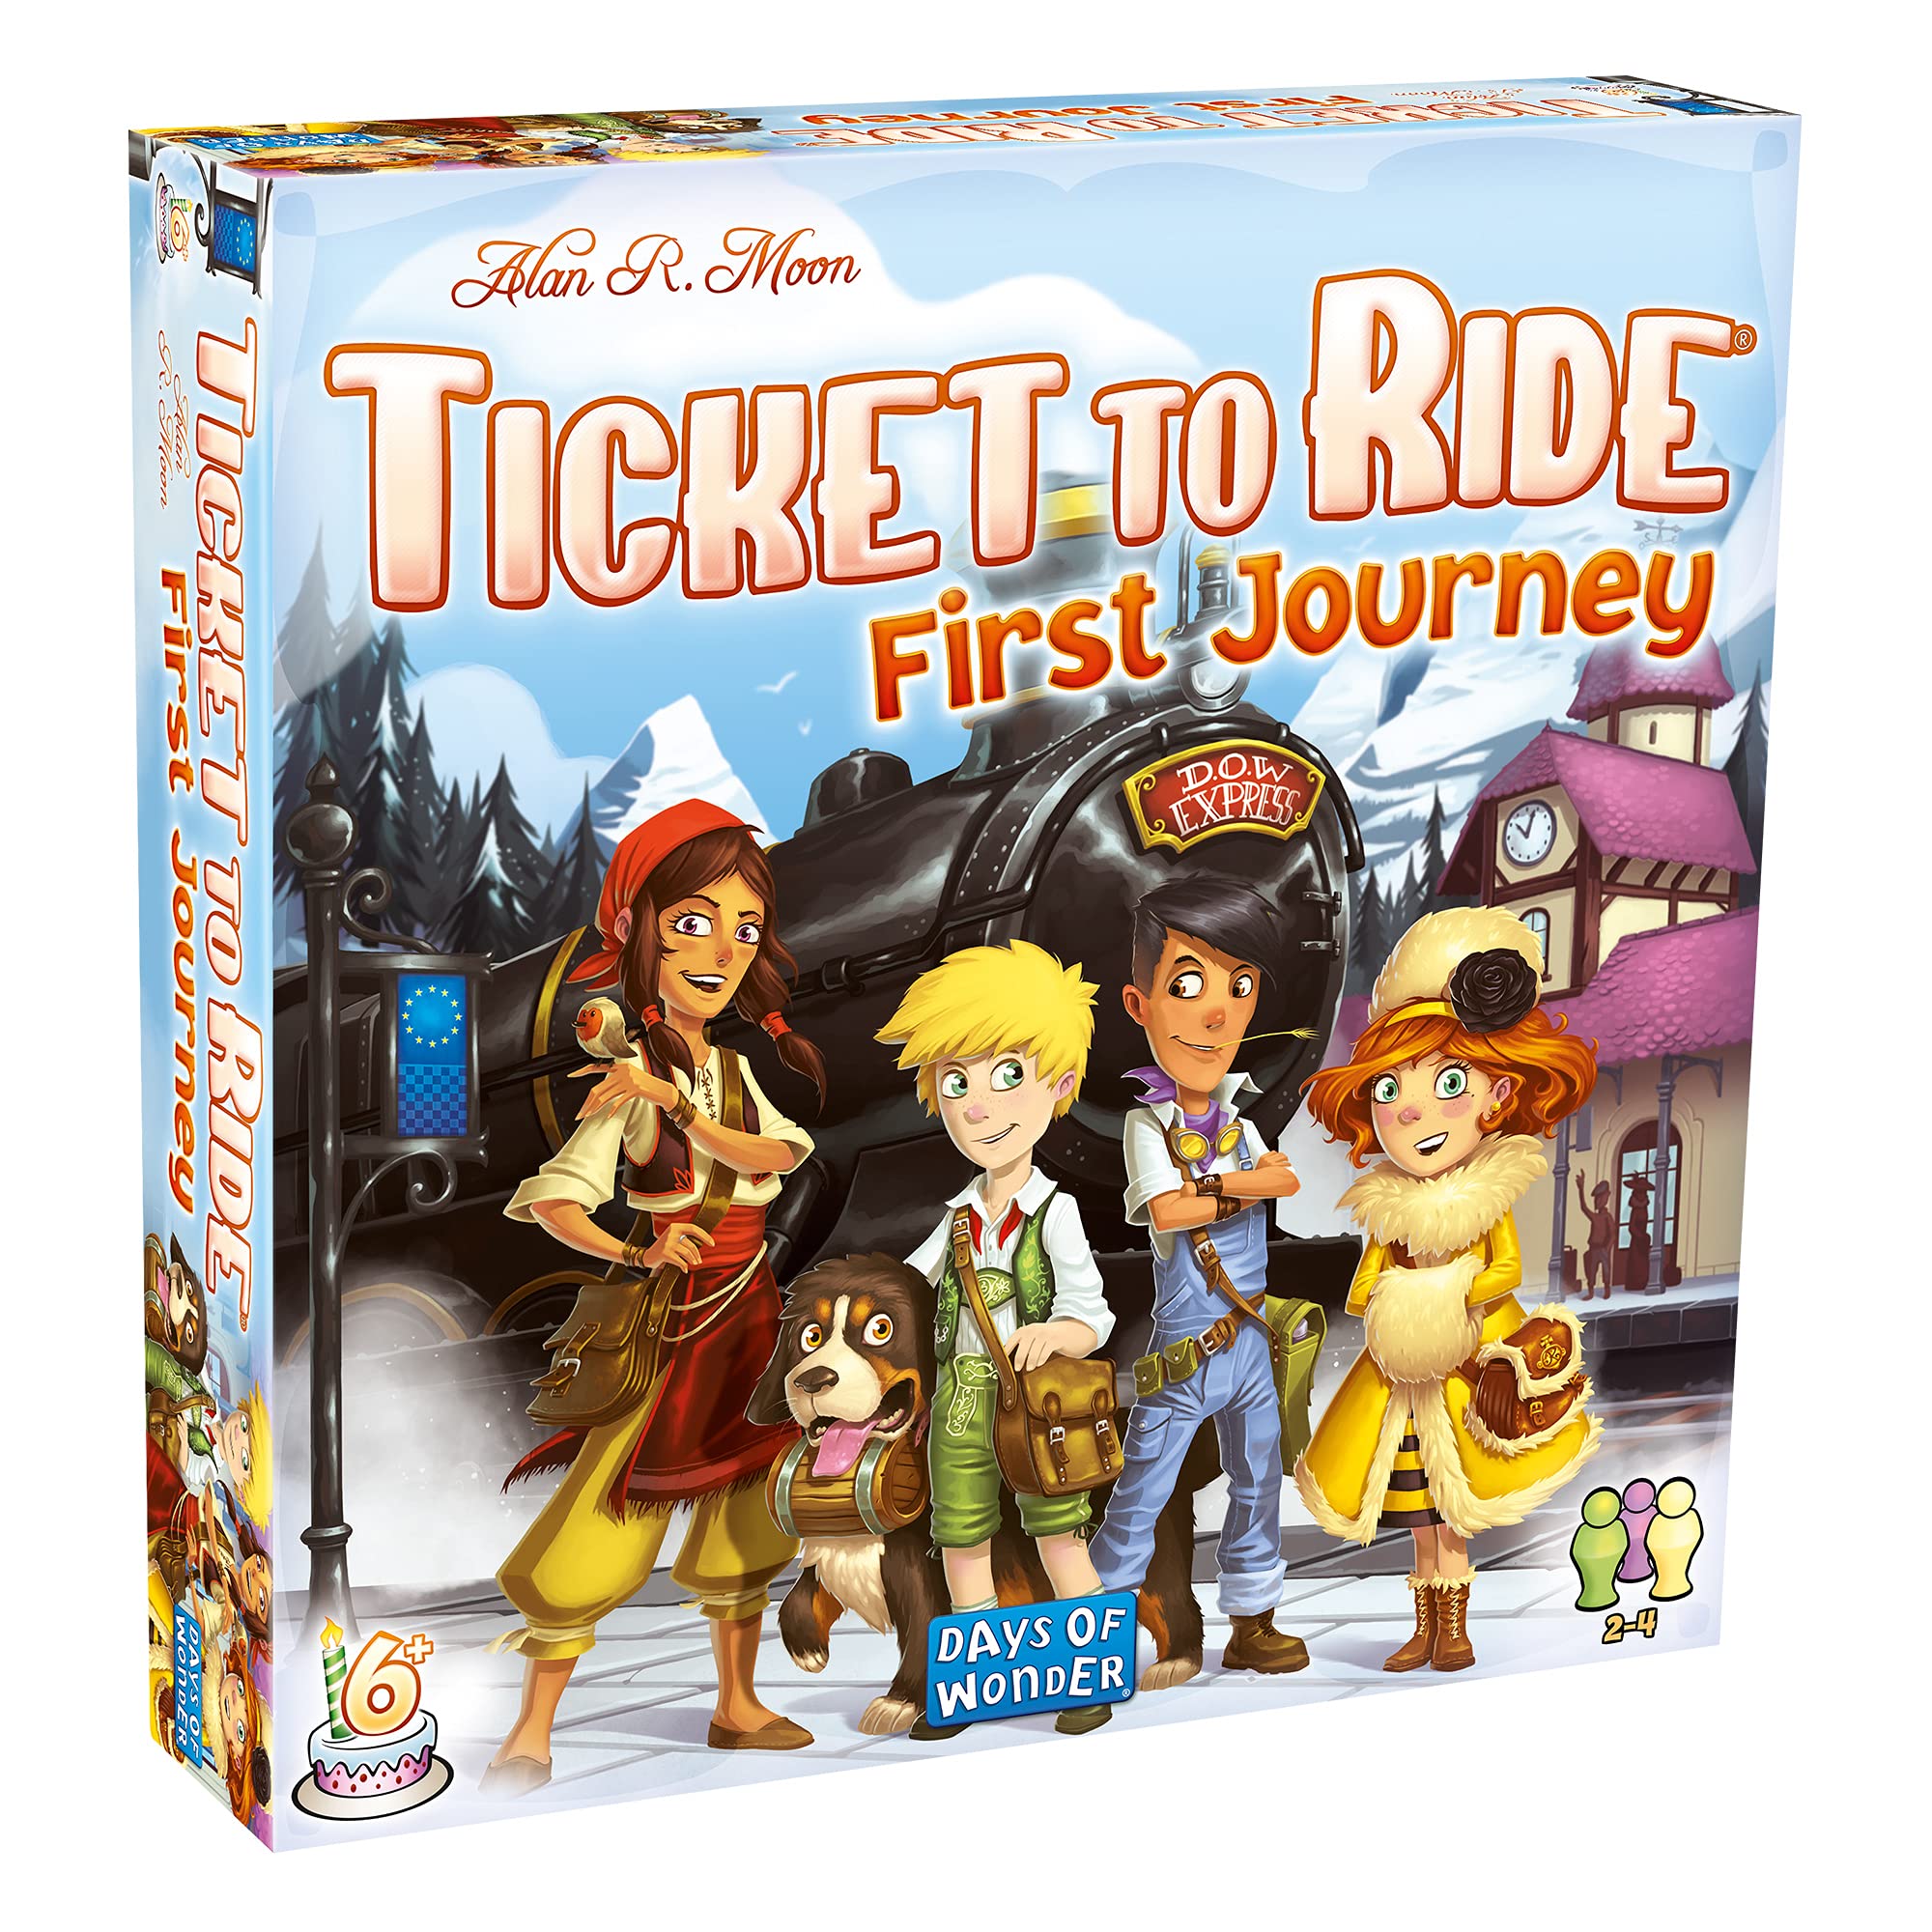  Ticket to Ride - Europe First Journey